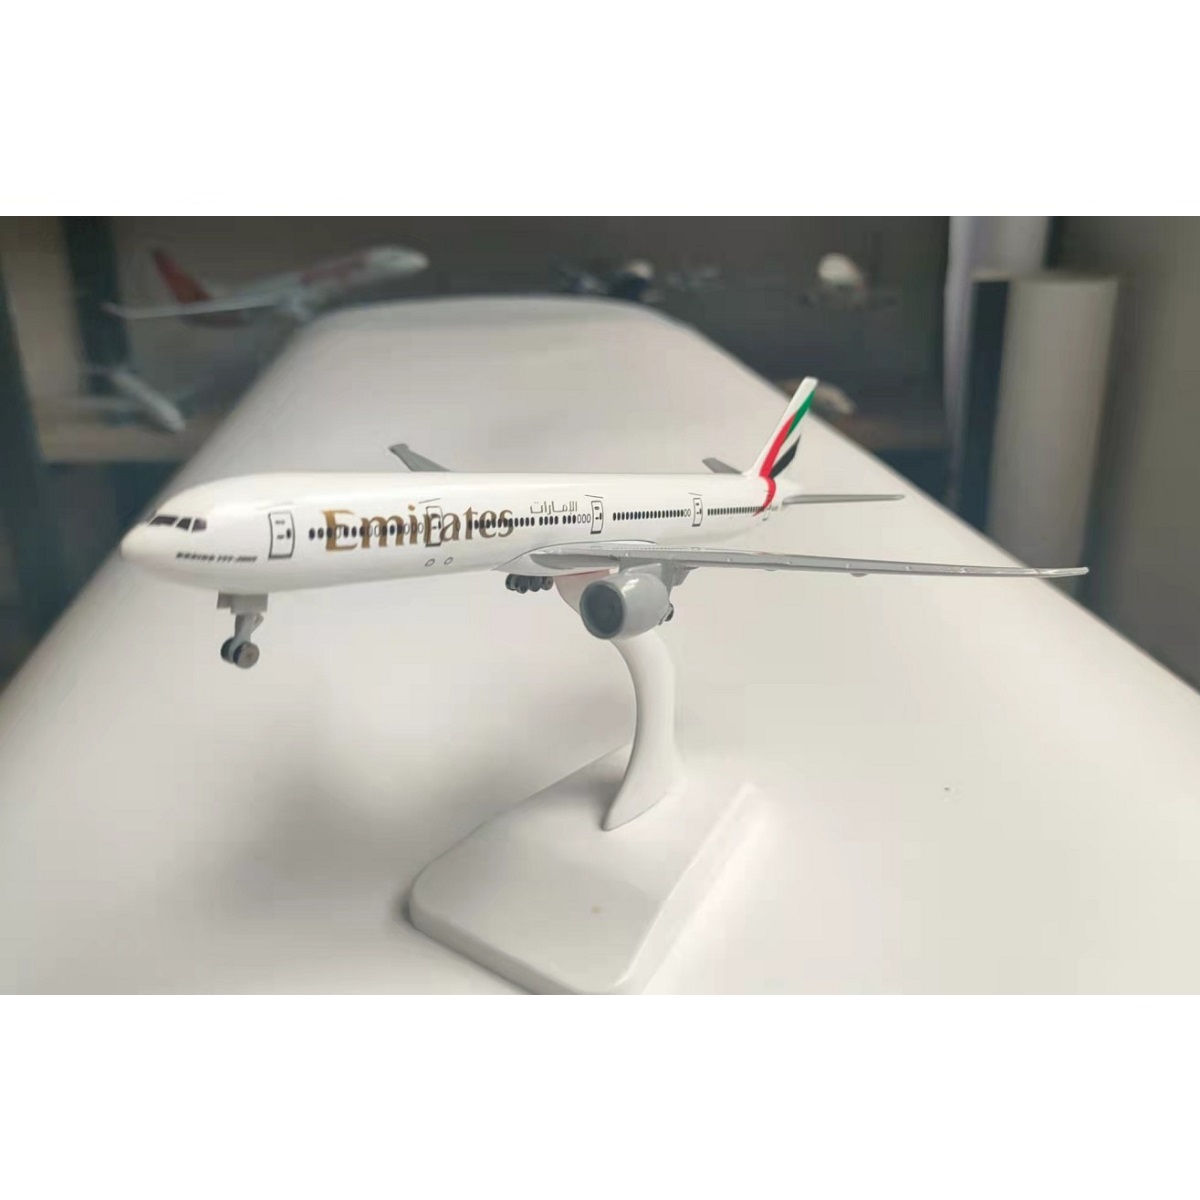 Emirates Airlines Airbus A380 Replica Toy Model with Stand